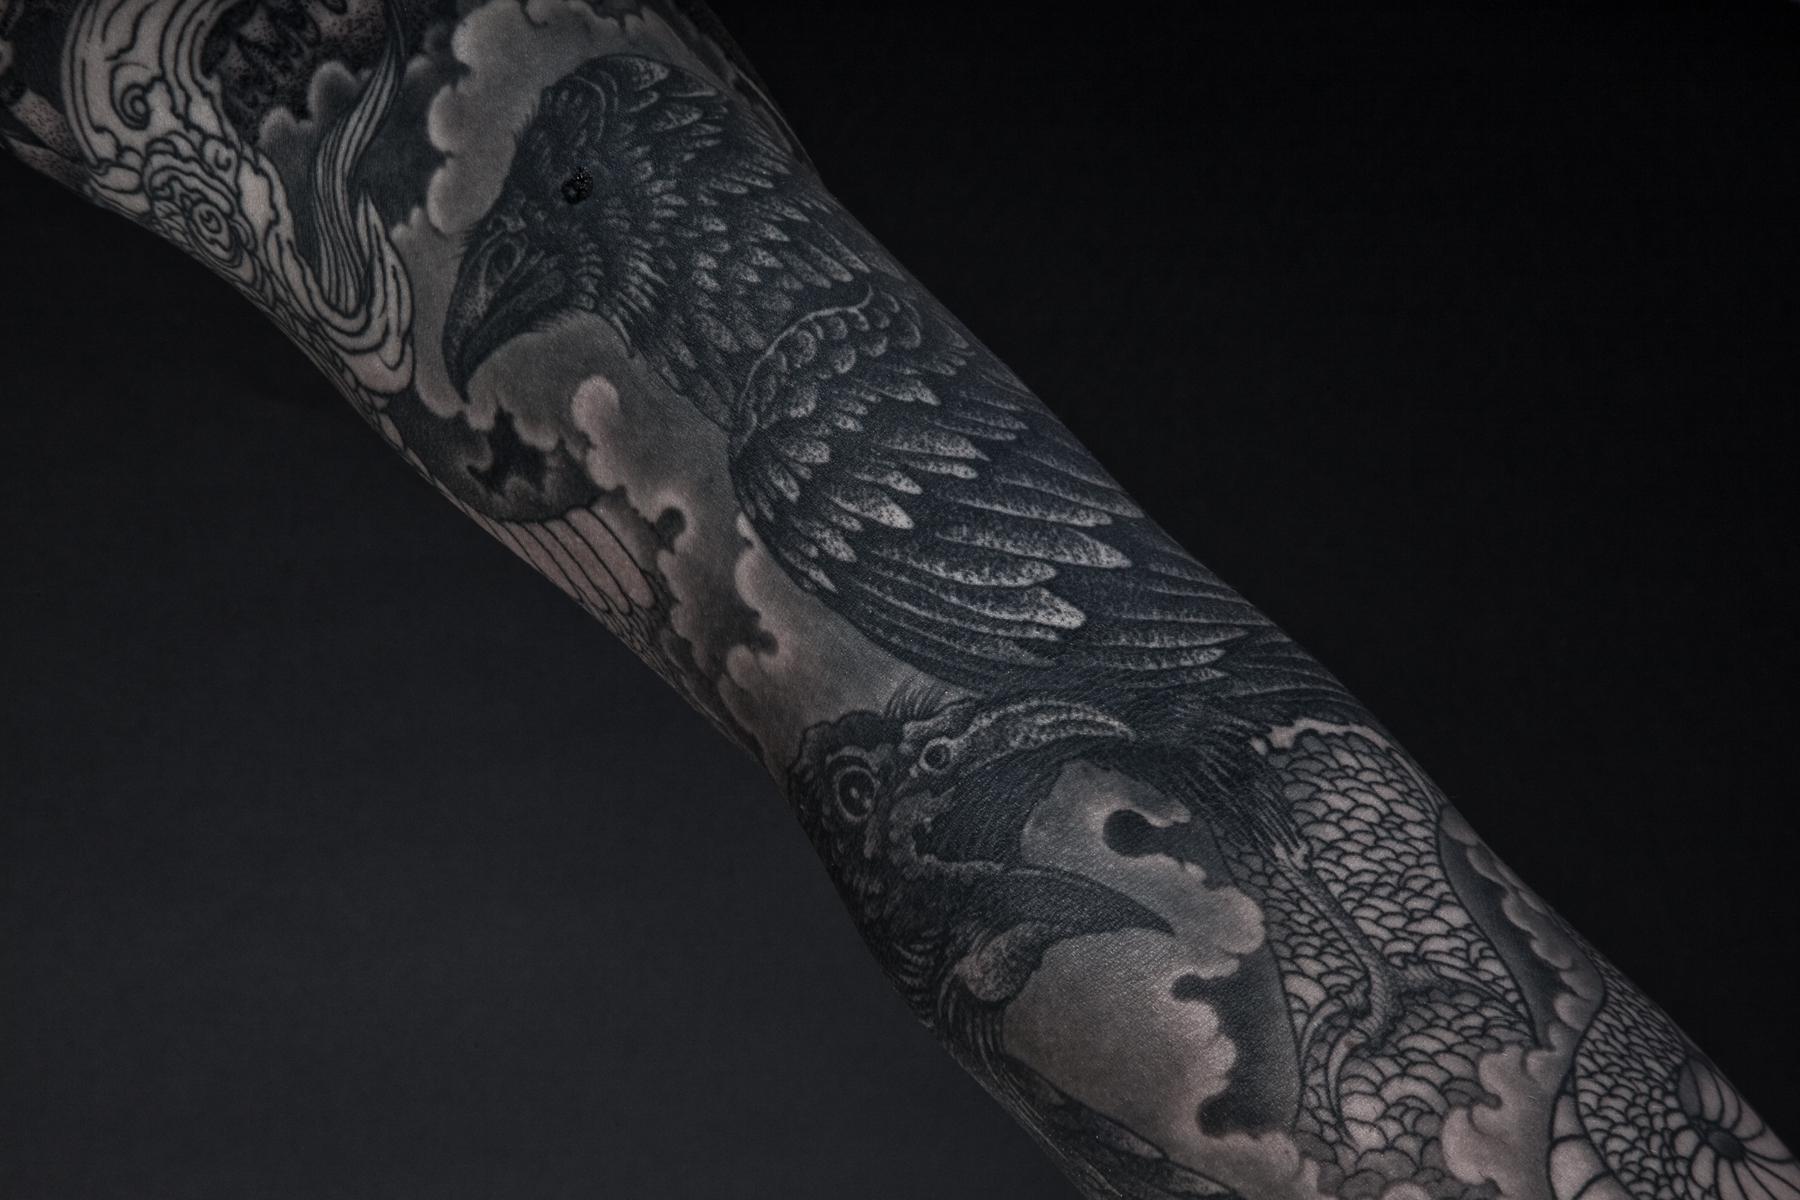 Continued working on Mason's Norse themed sleeve today 